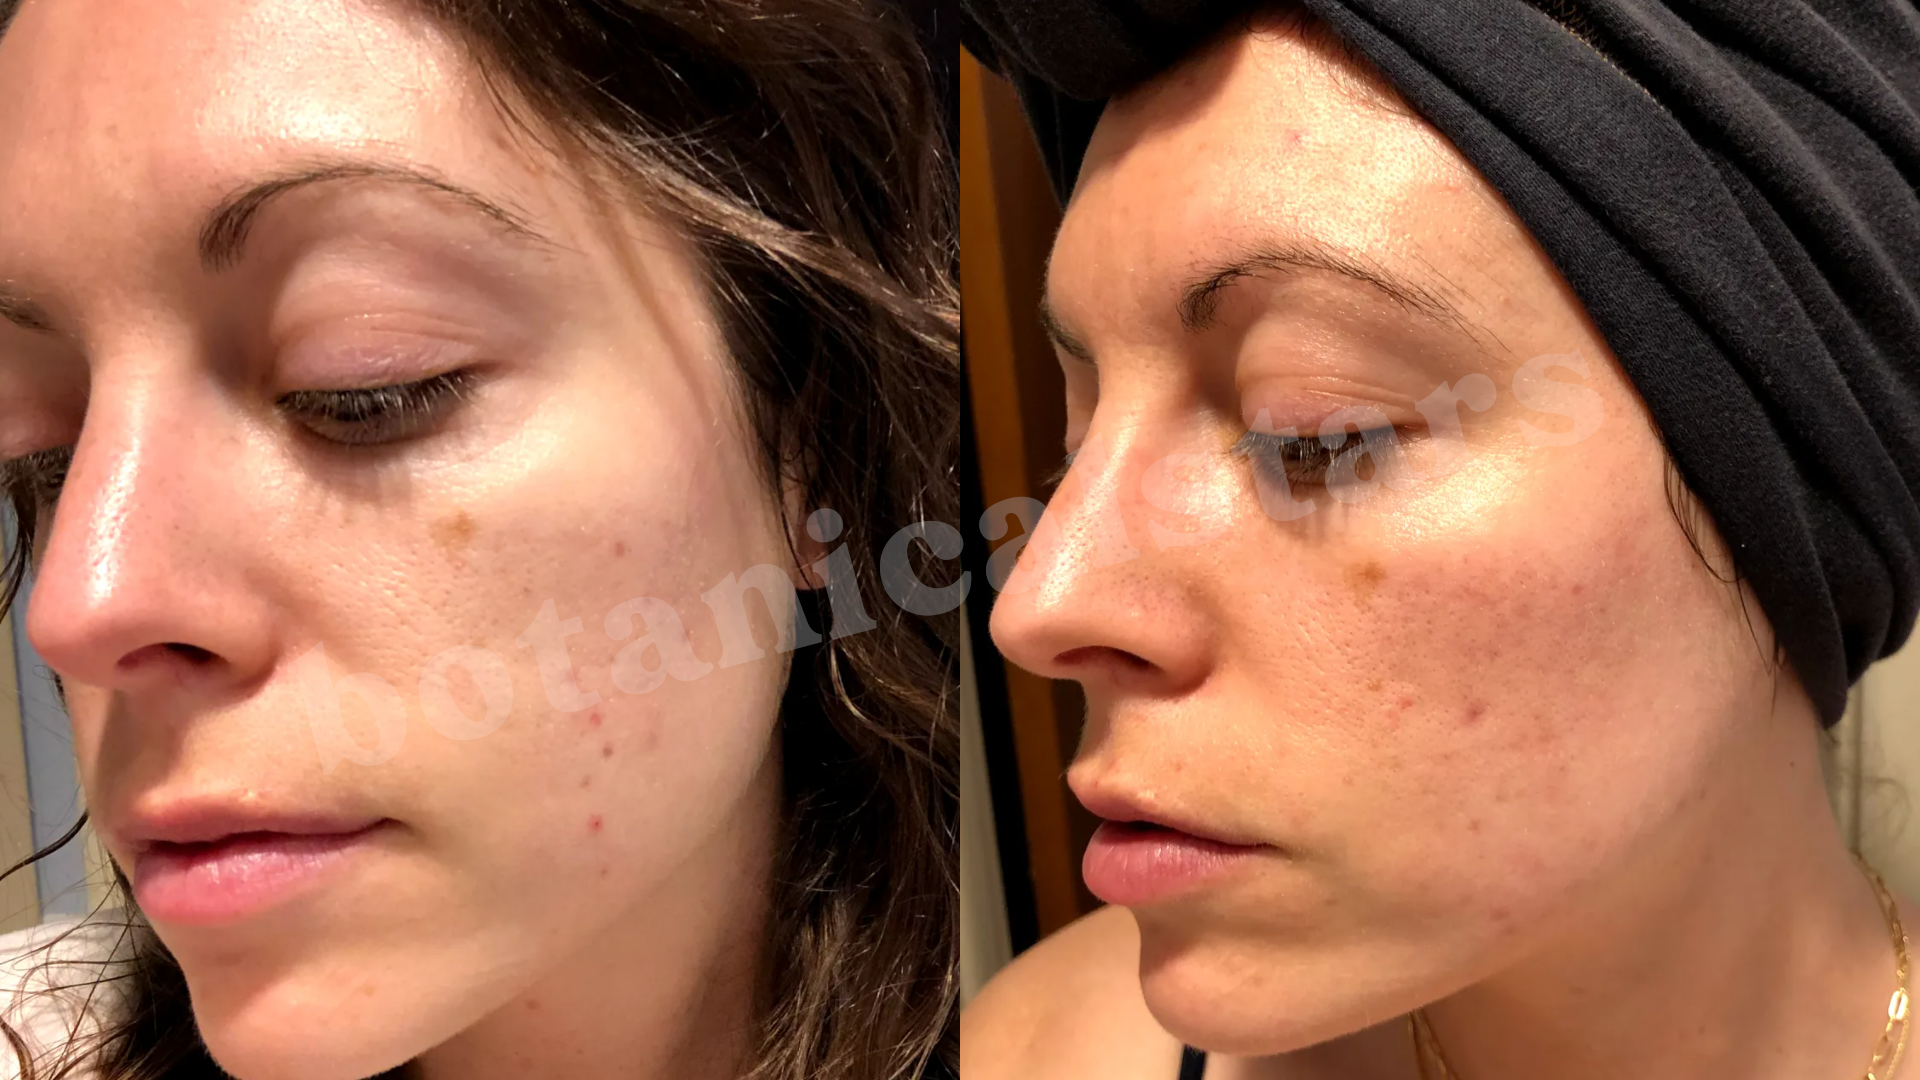 Erasing Scarring Formed Years Ago & Toning Oily/Acne-Prone Skin Easily